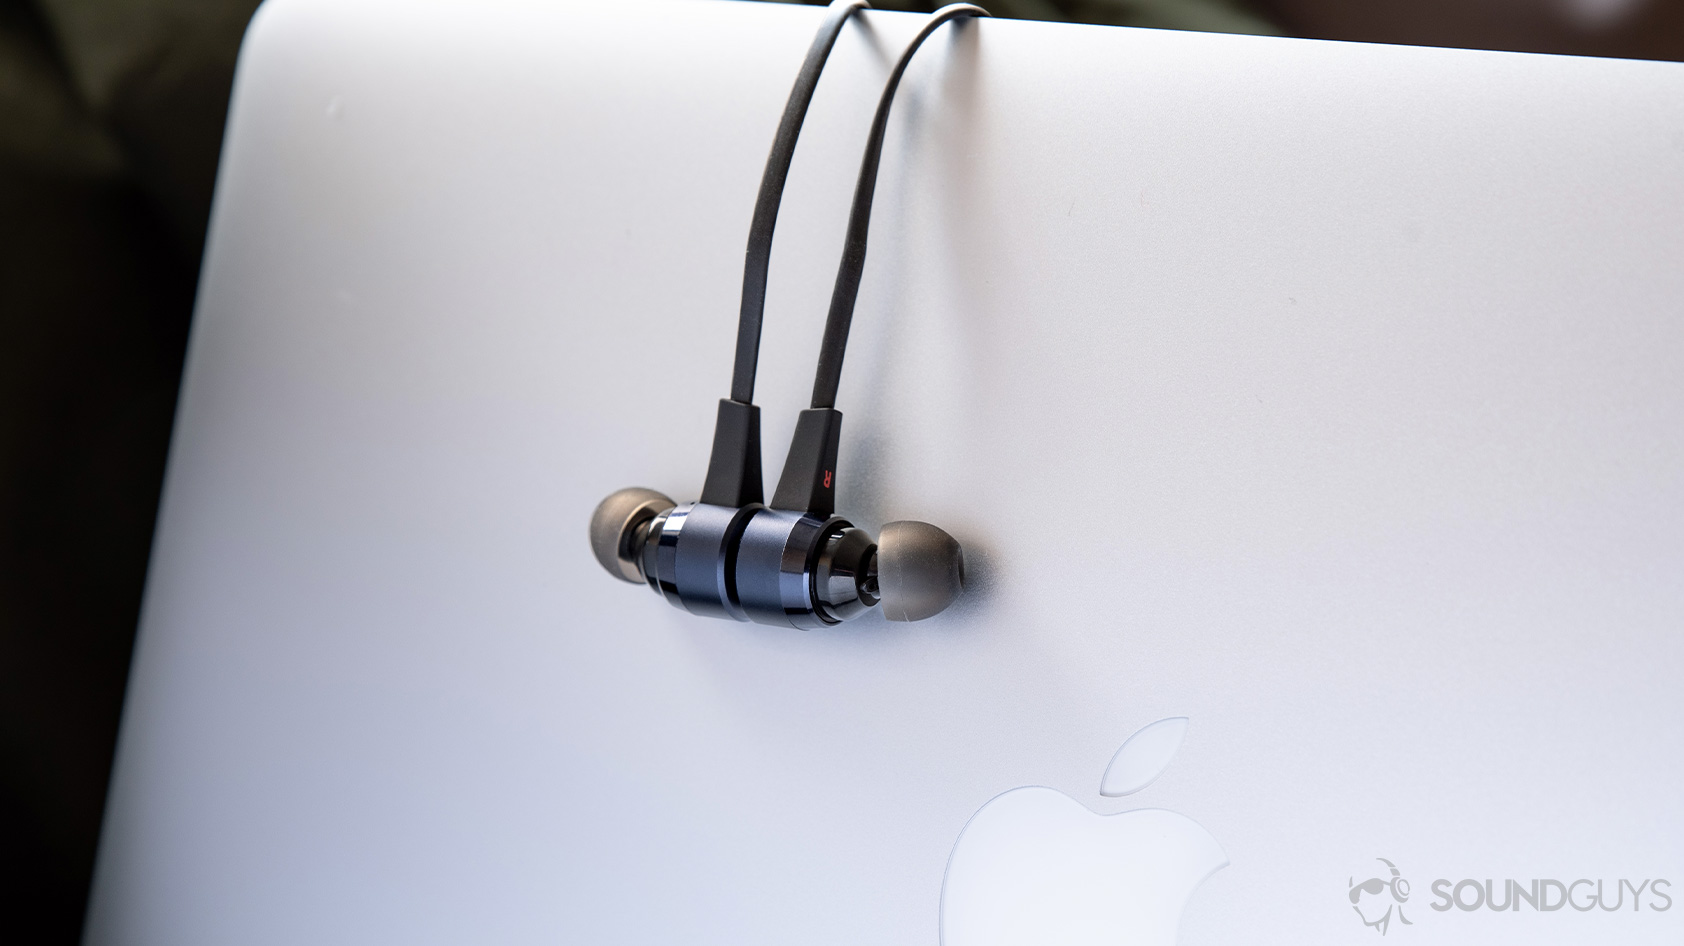 A photo of the Massdrop x NuForce Stride wireless earbuds (blue) hanging over a Macbook Pro laptop with the magnetic housings clasped together.